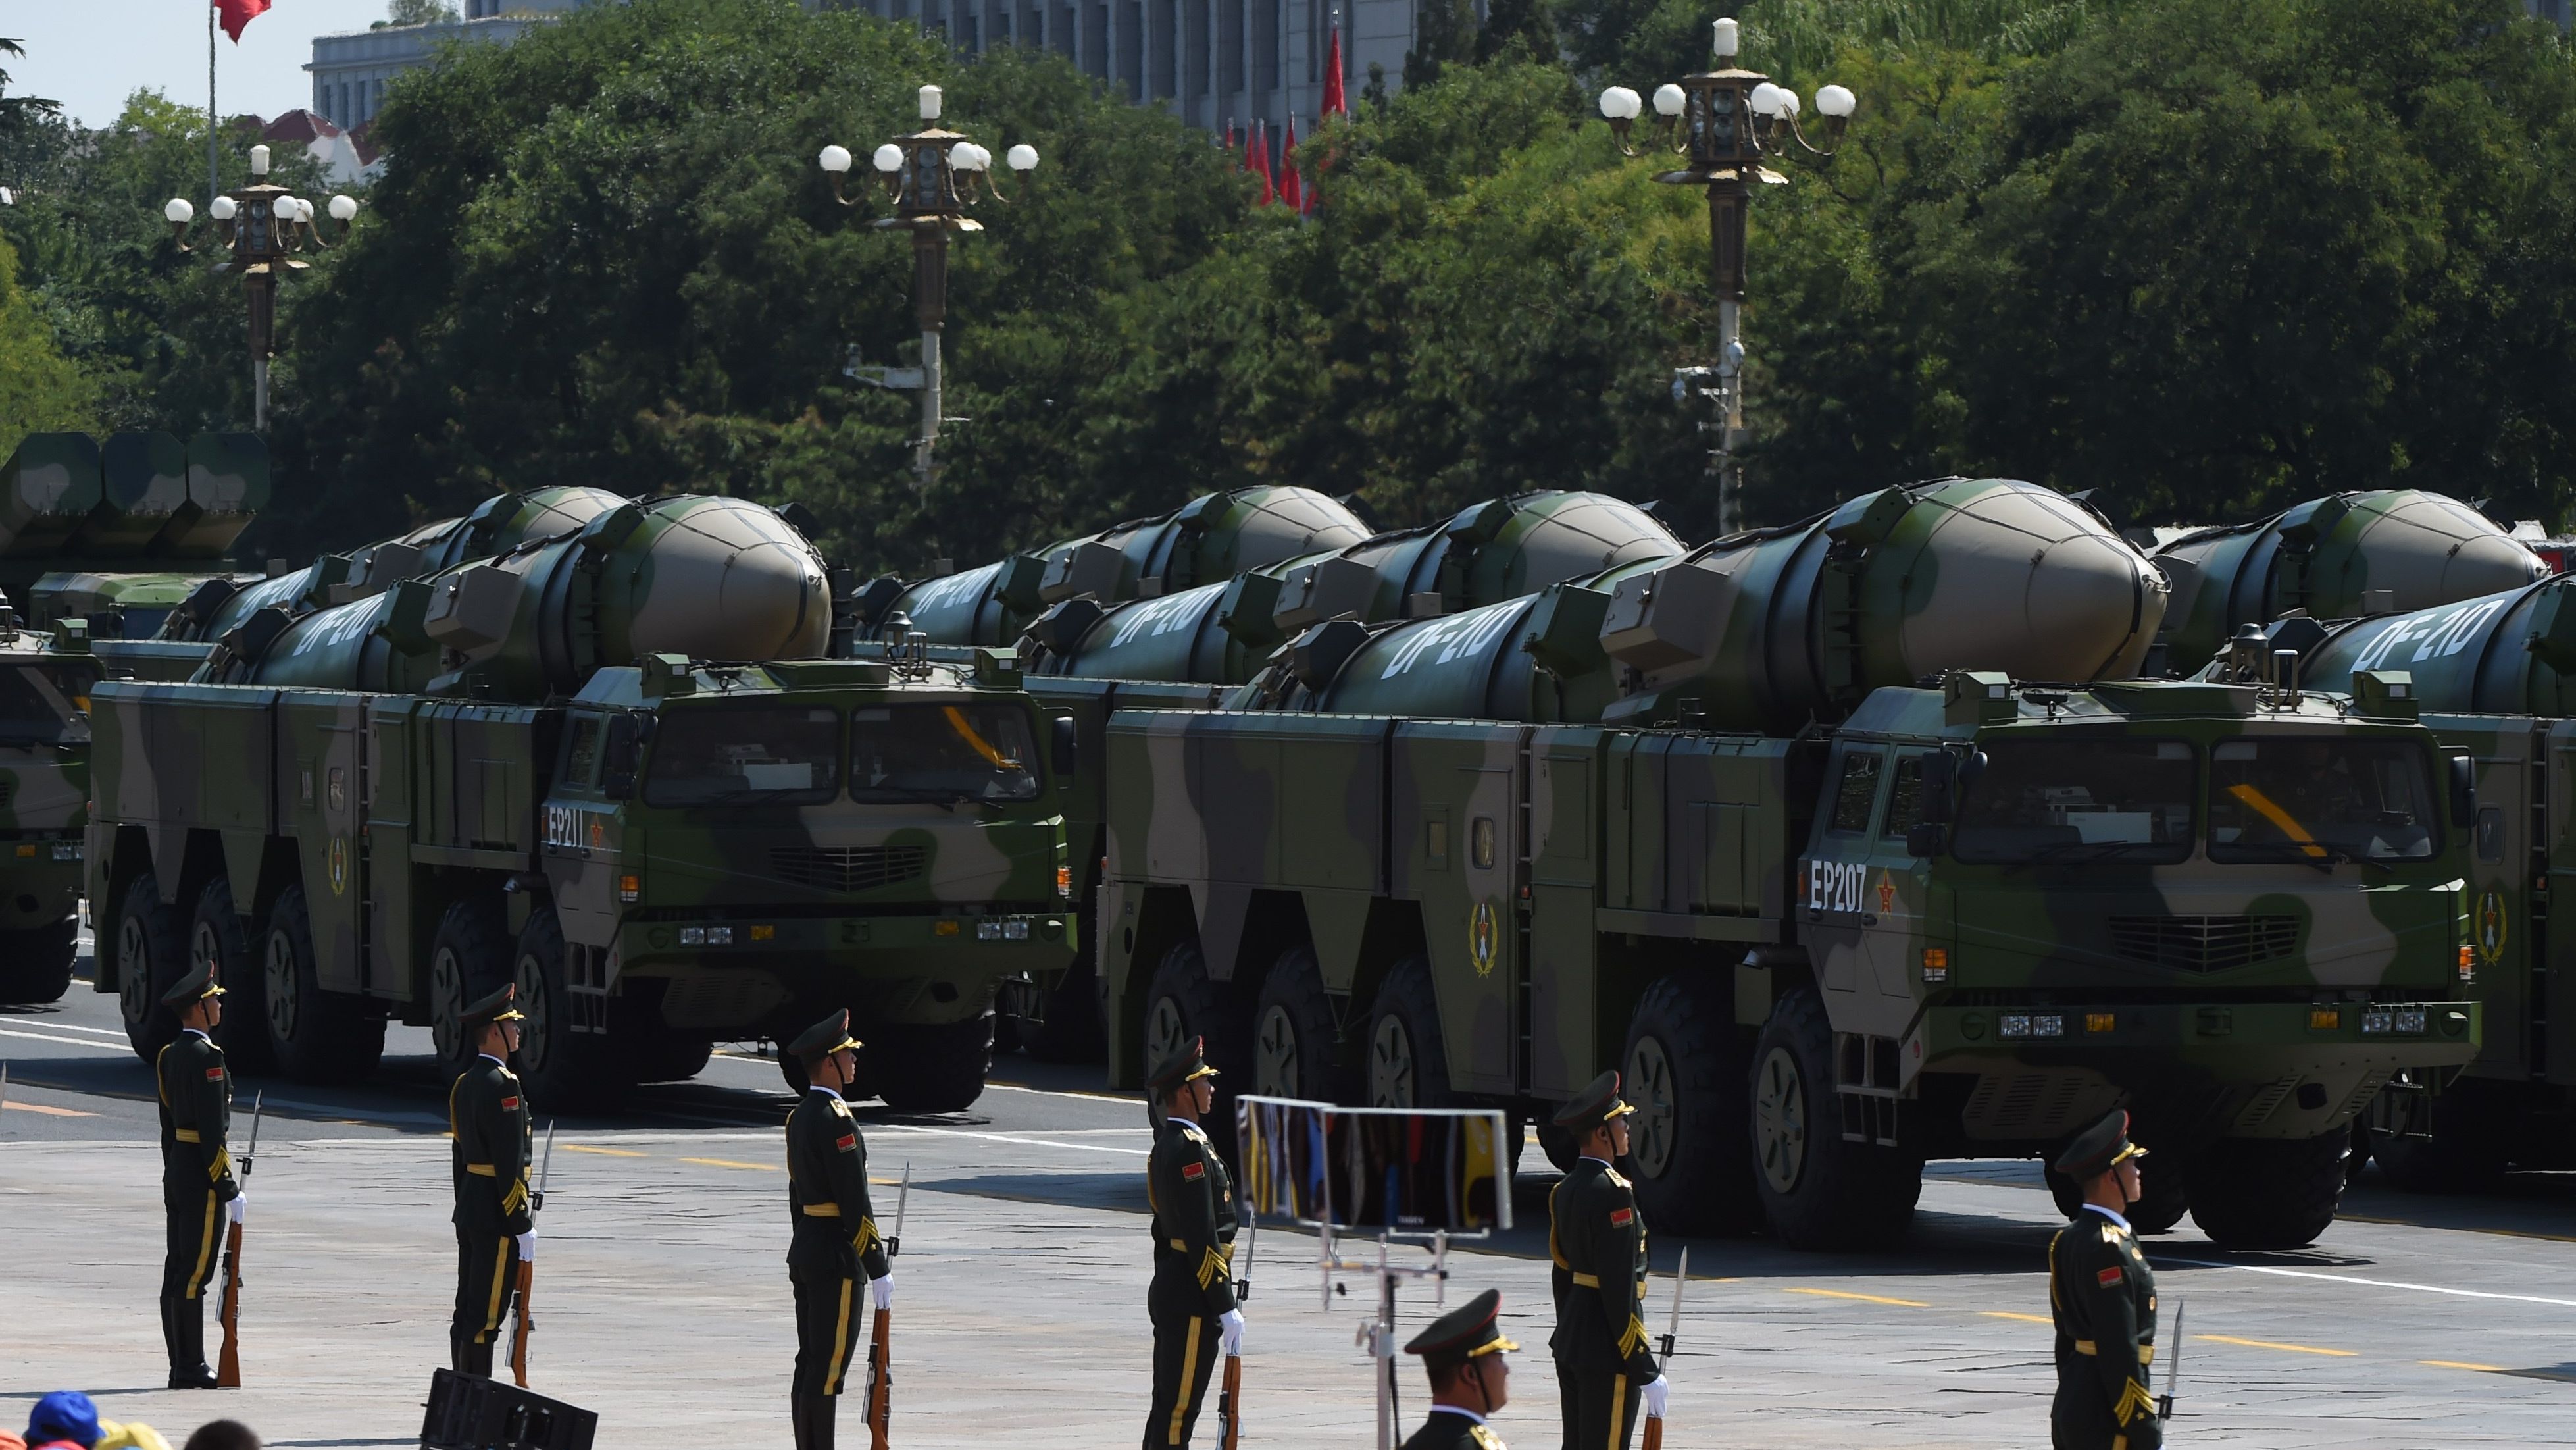 Military vehicles carrying DF-21D missiles, also known as the"carrier-killer" are displayed in a military parade at Tiananmen Square in Beijing on September 3, 2015.